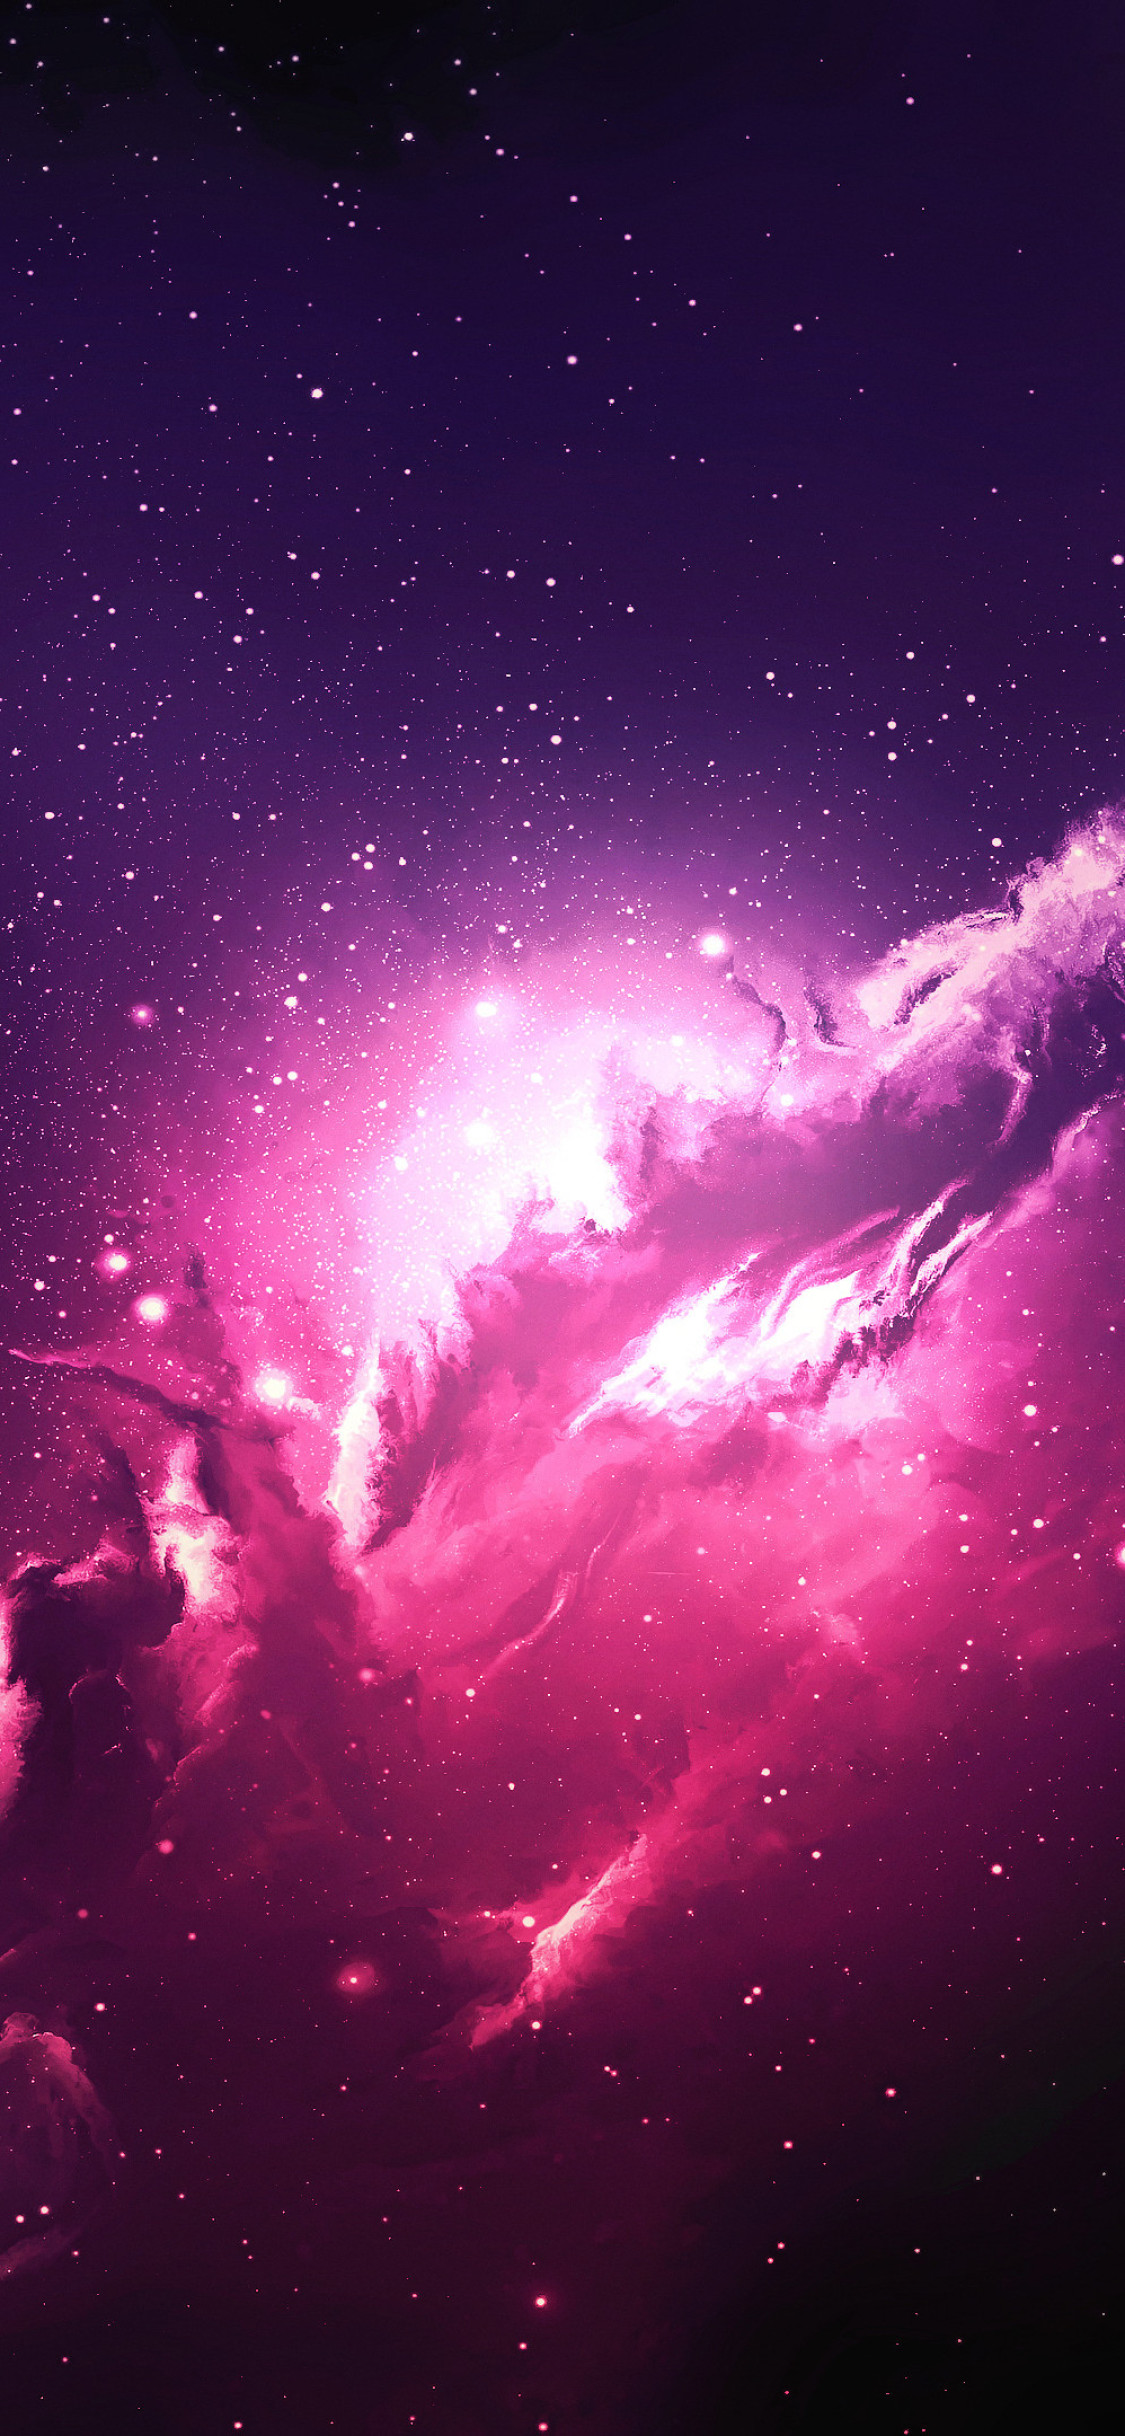 universe wallpaper,sky,pink,nebula,atmosphere,outer space